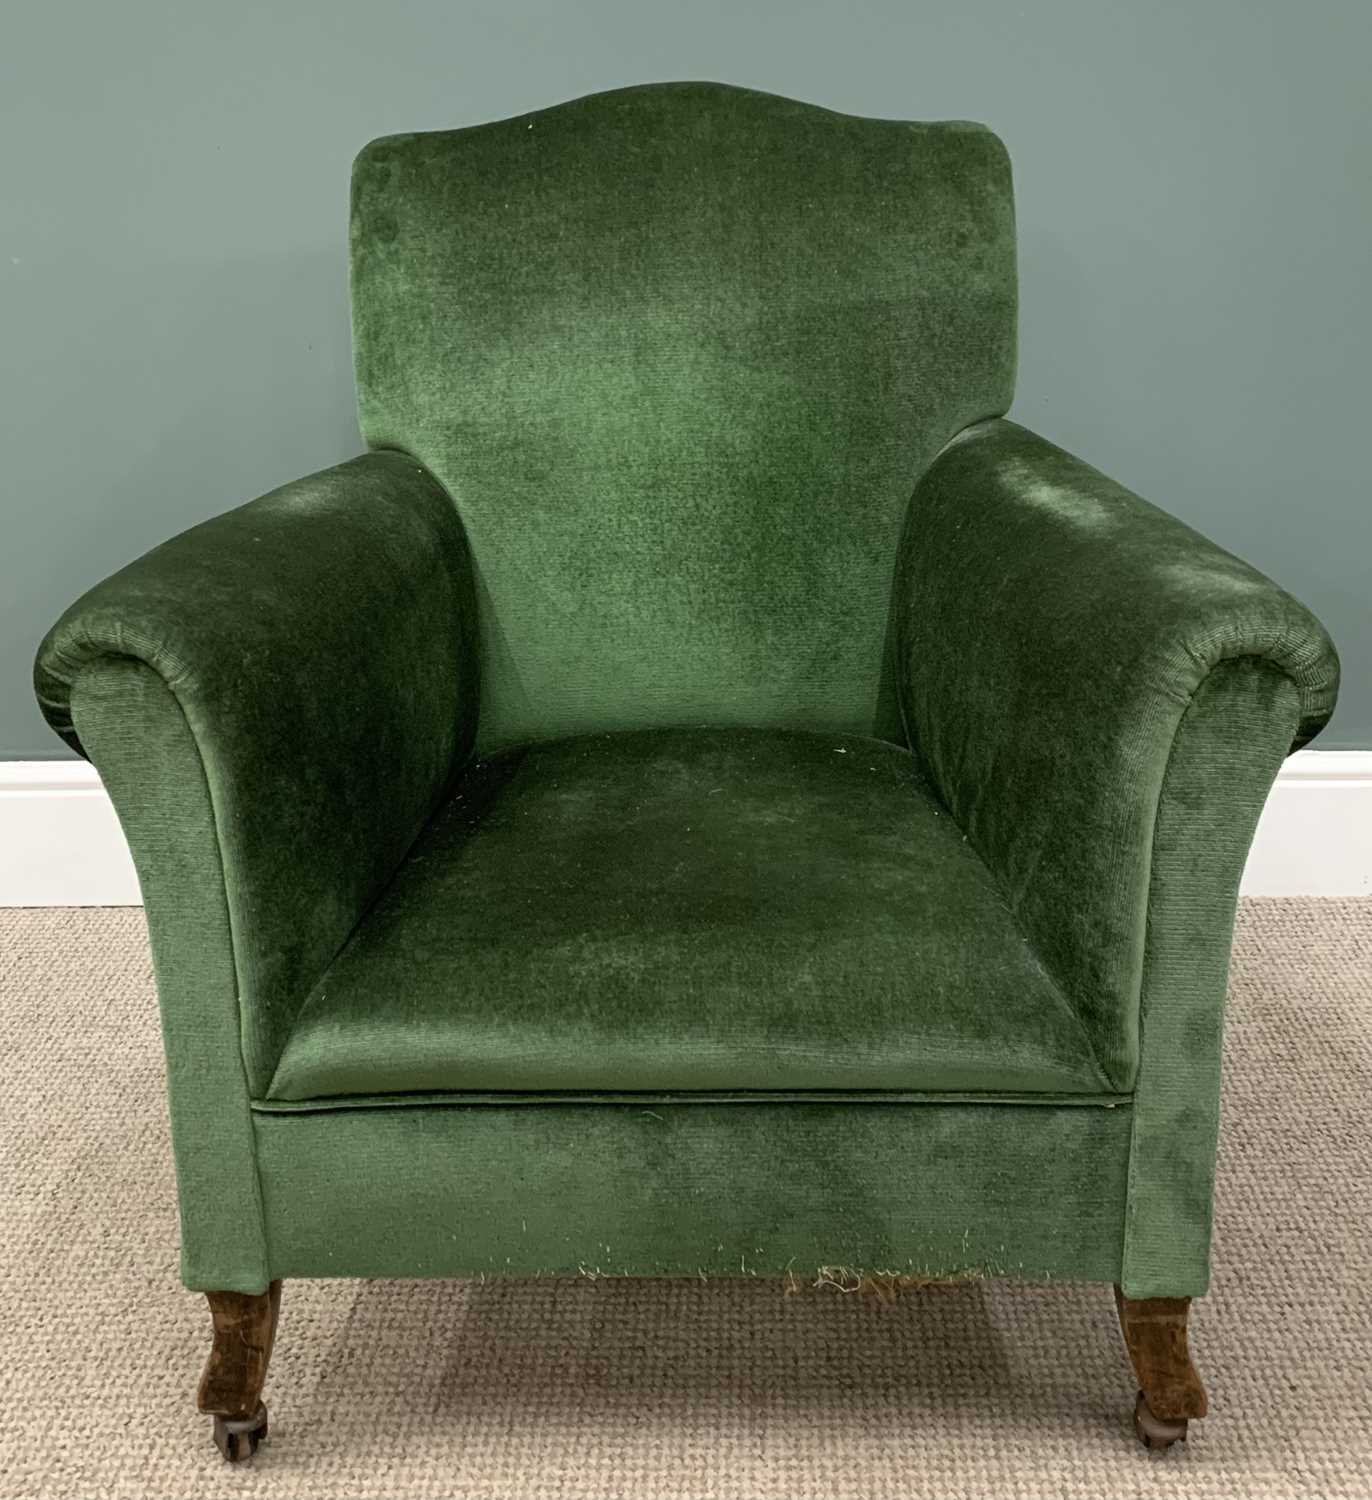 VINTAGE ARMCHAIR in green upholstery, 89 (h) x 80 (w) x 52 (d) cms Provenance: Private collection - Image 3 of 4